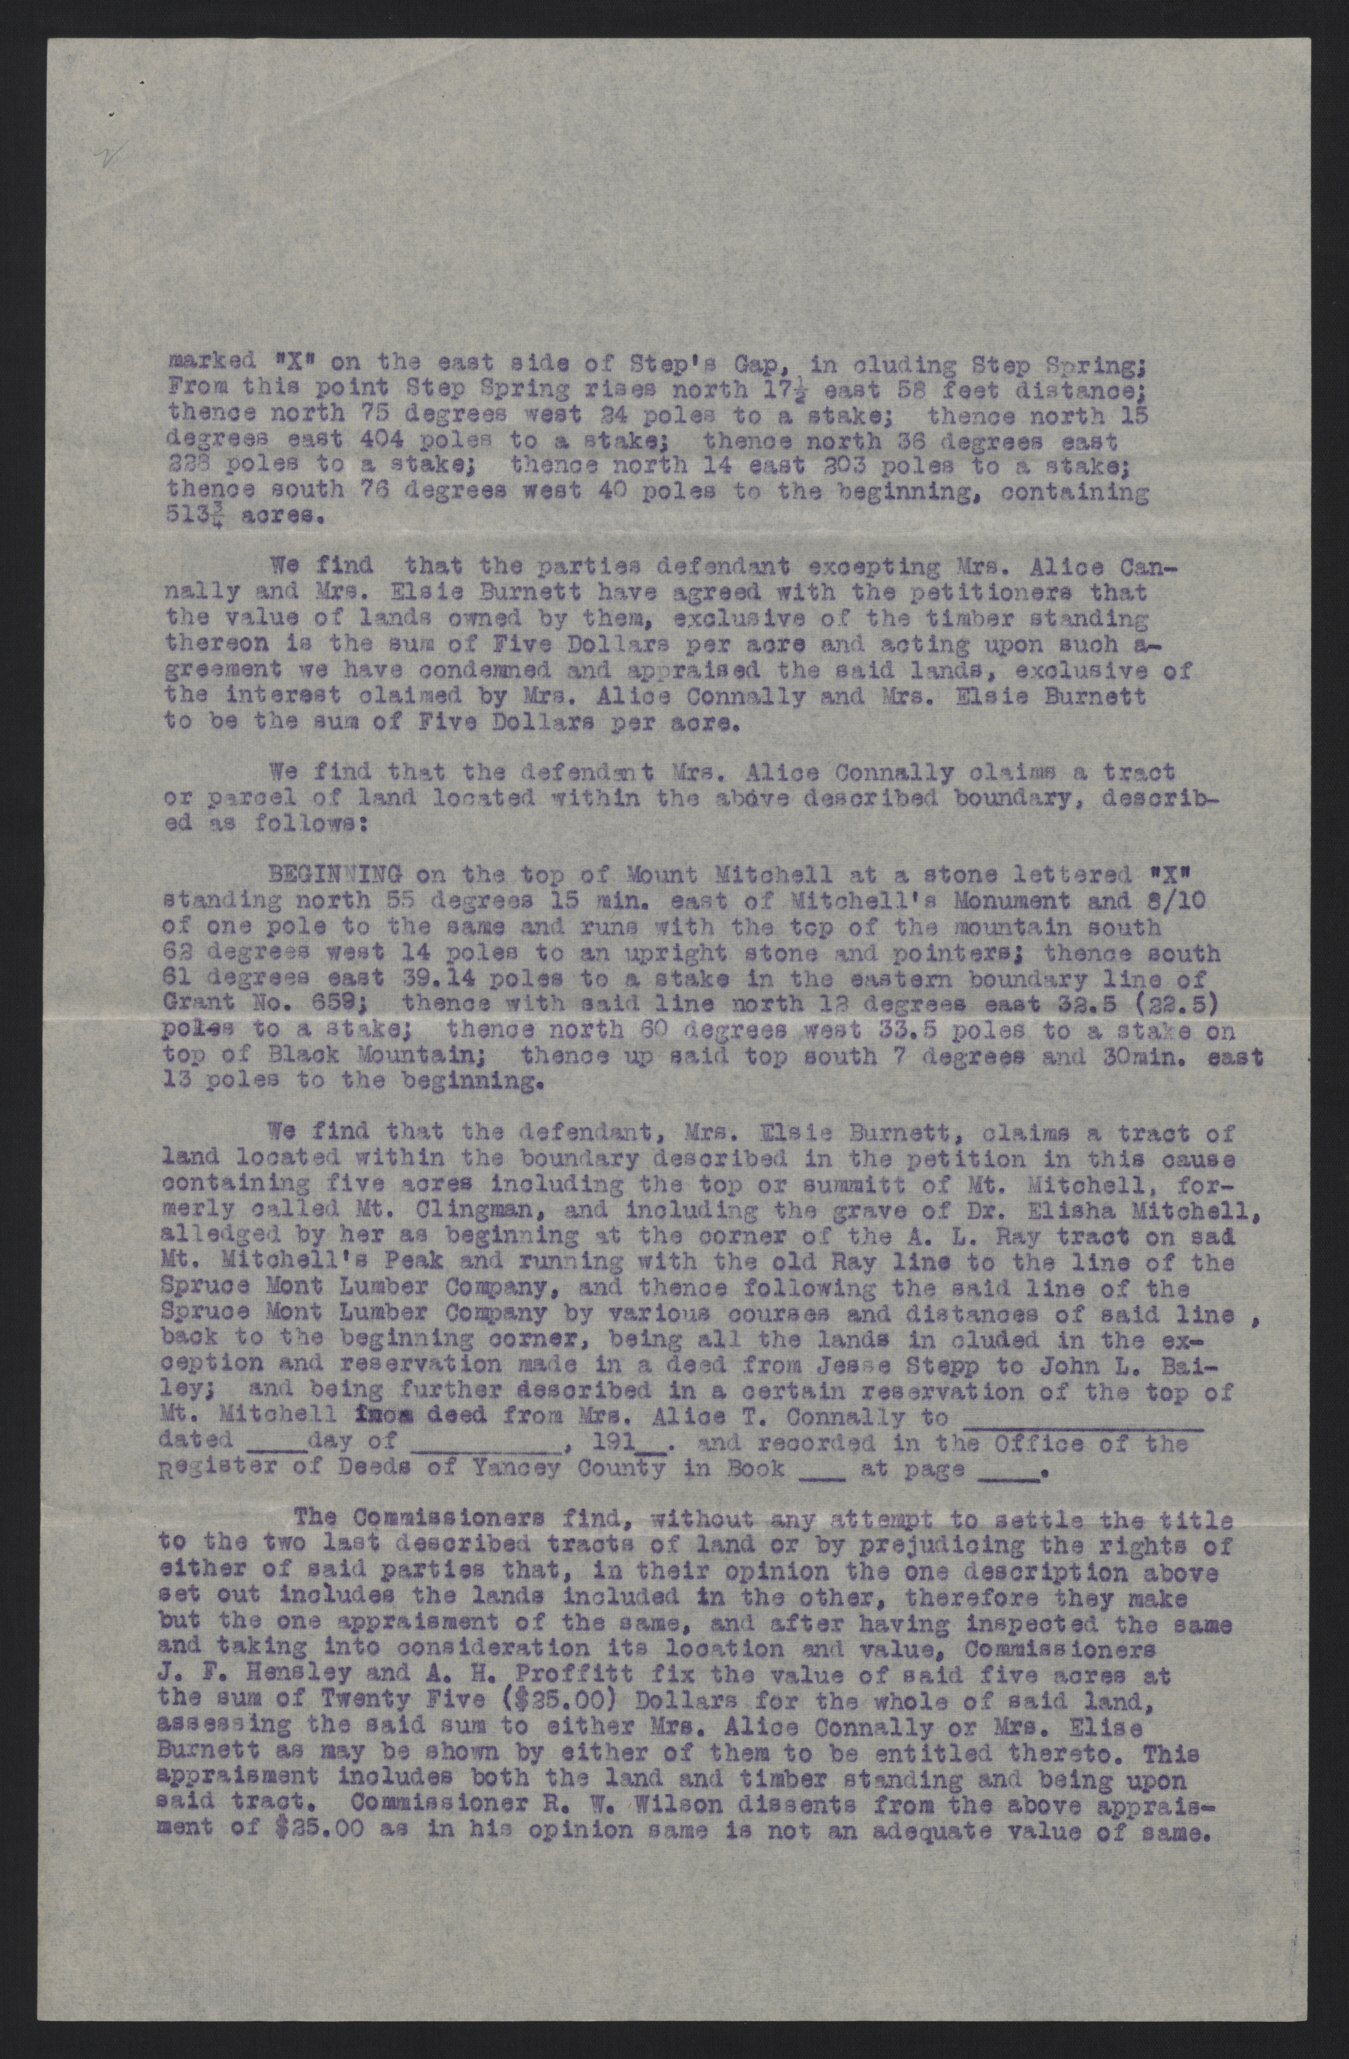 Report of the Mitchell Peak Park Commission, 10 July 1916, page 2